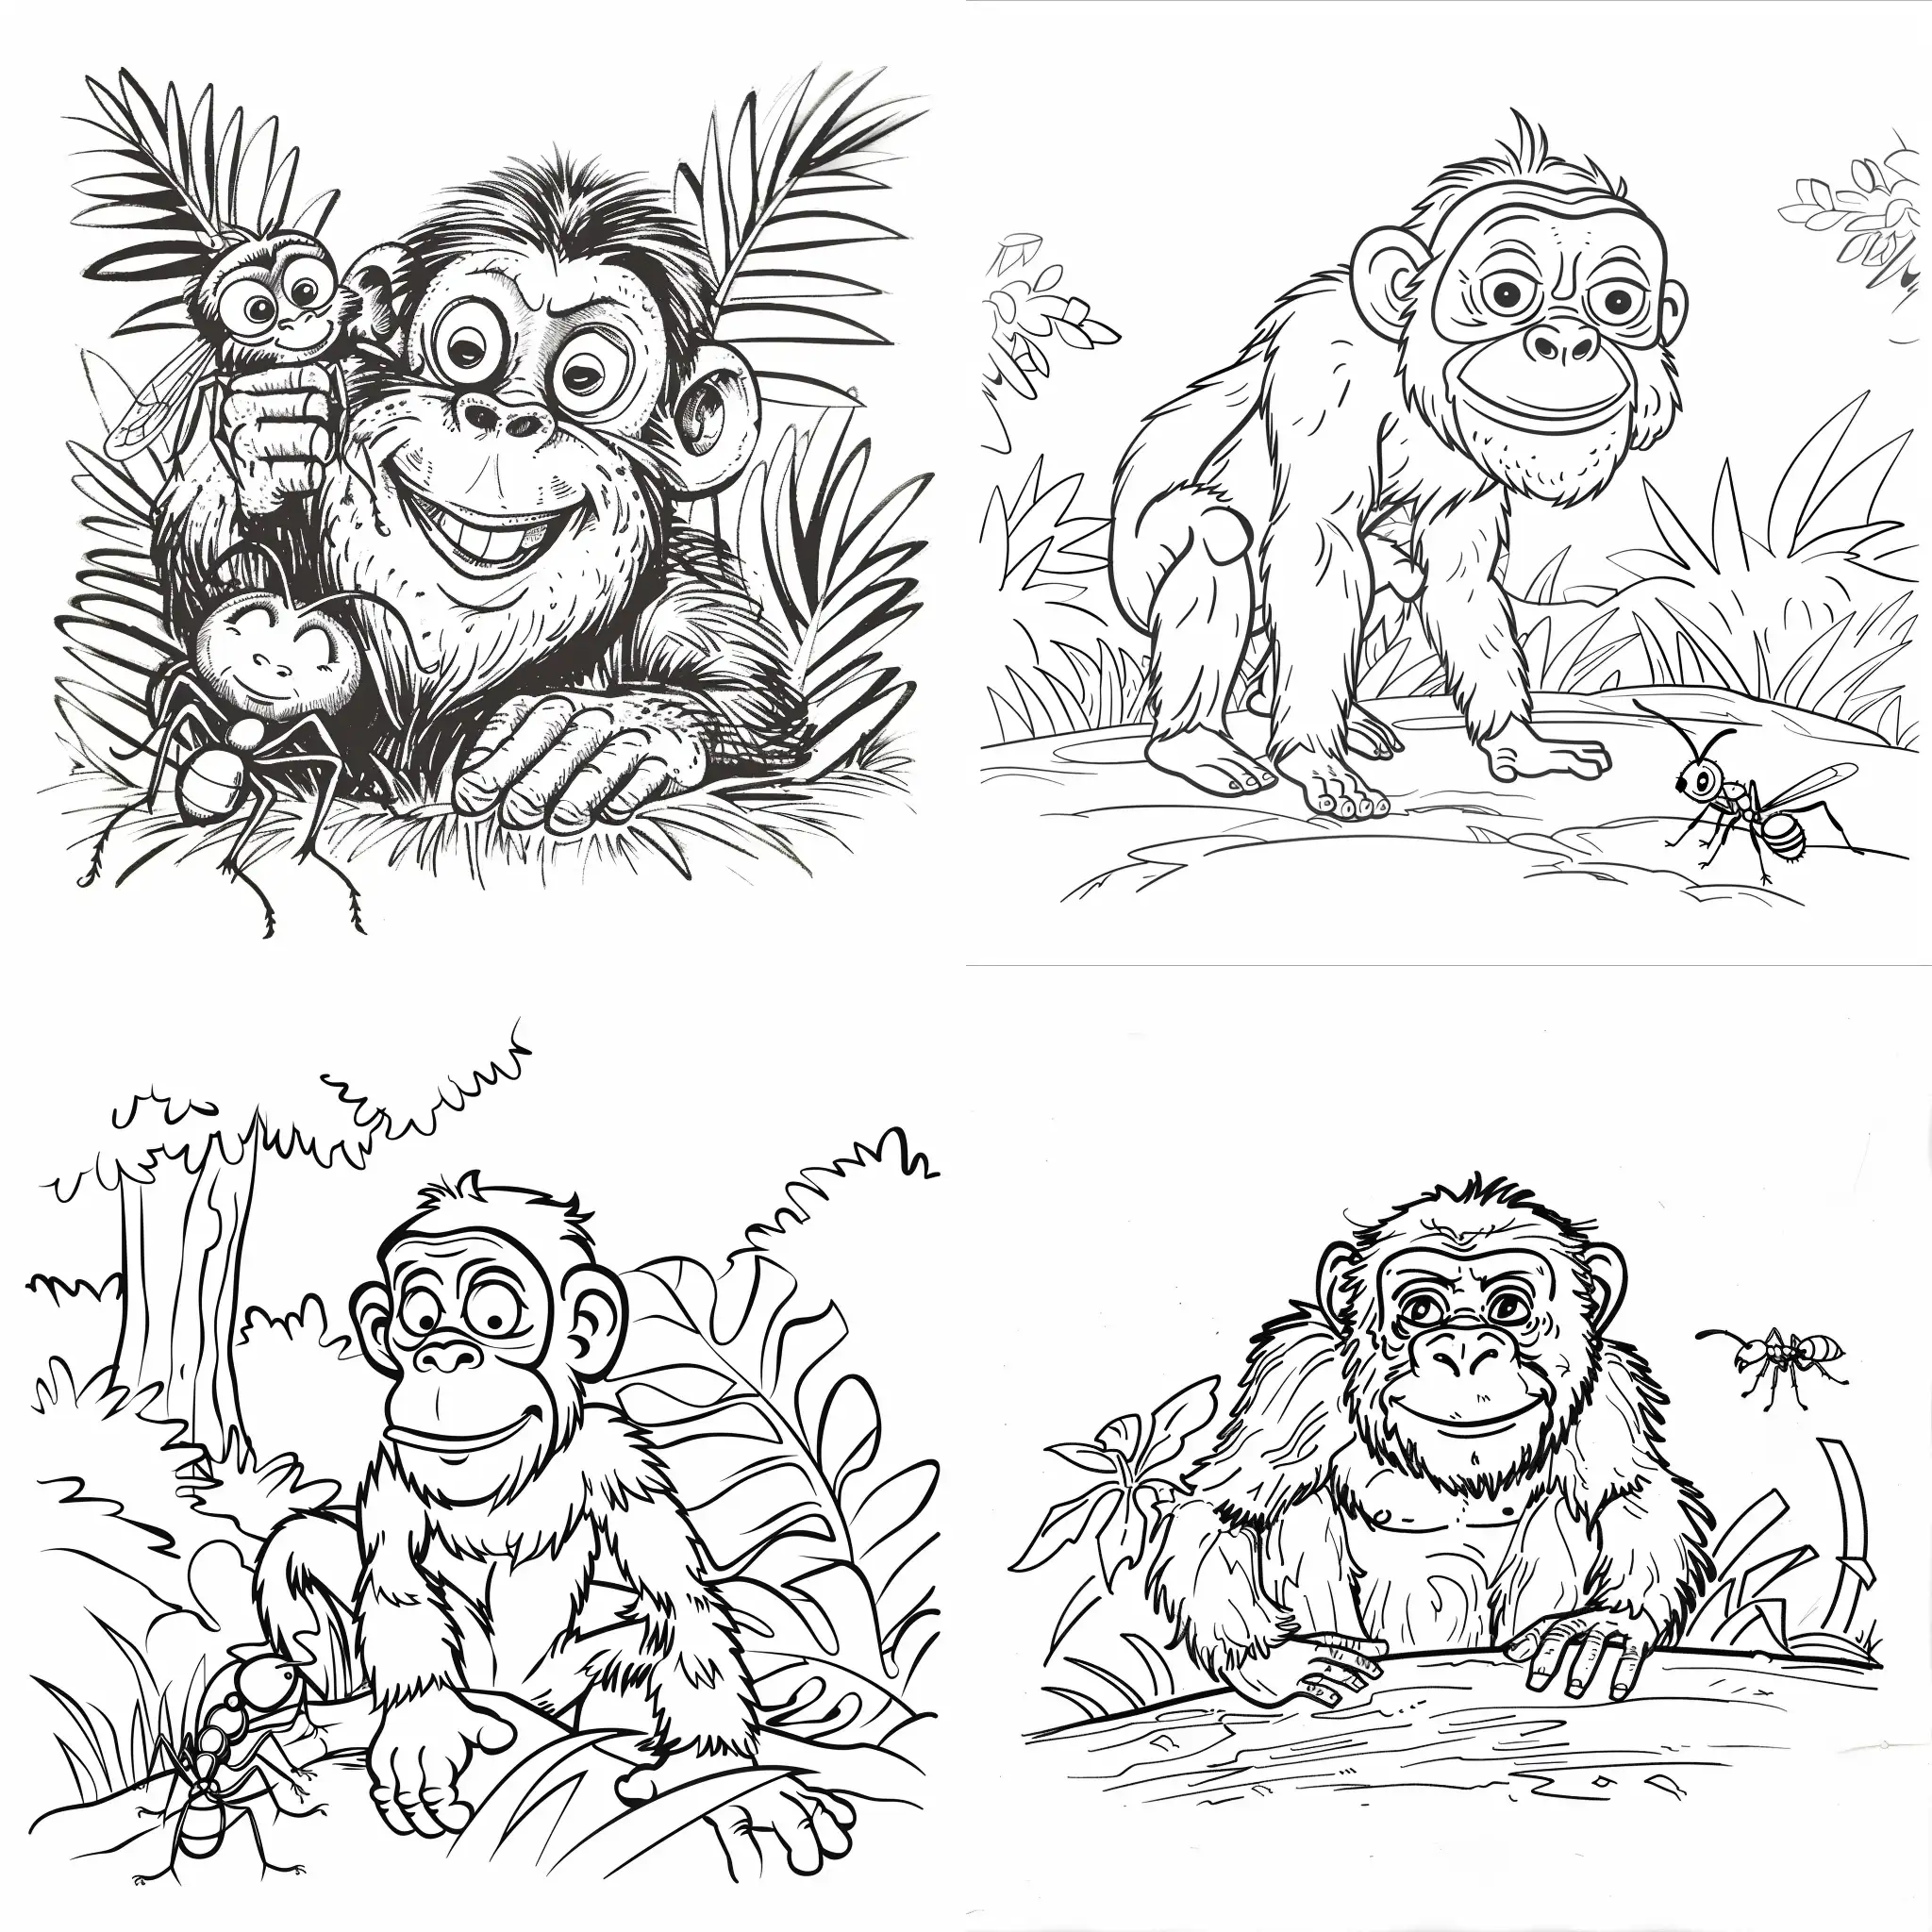 Ape-and-Ant-Coloring-Page-Playful-Animal-Friends-Illustration